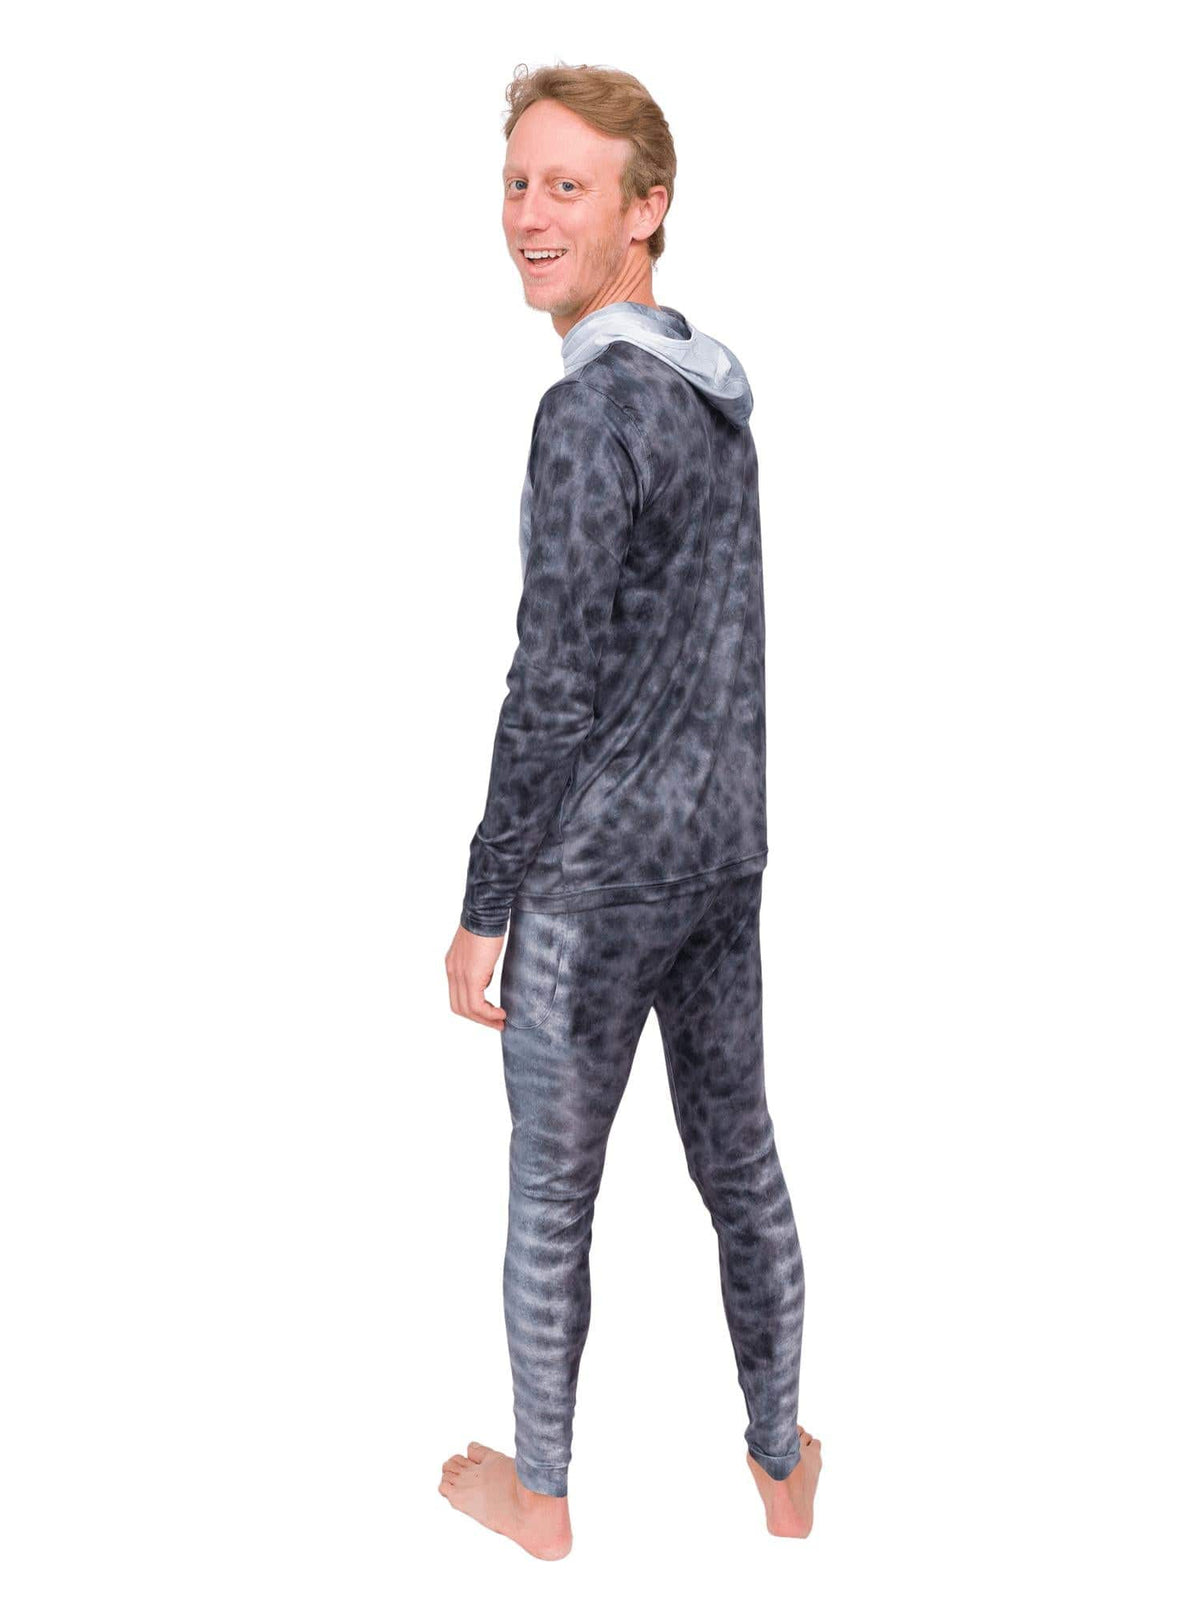 Model: Jake is a shark scientist and educator with Field School. He is 5’10, 135lbs and is wearing a size M legging.